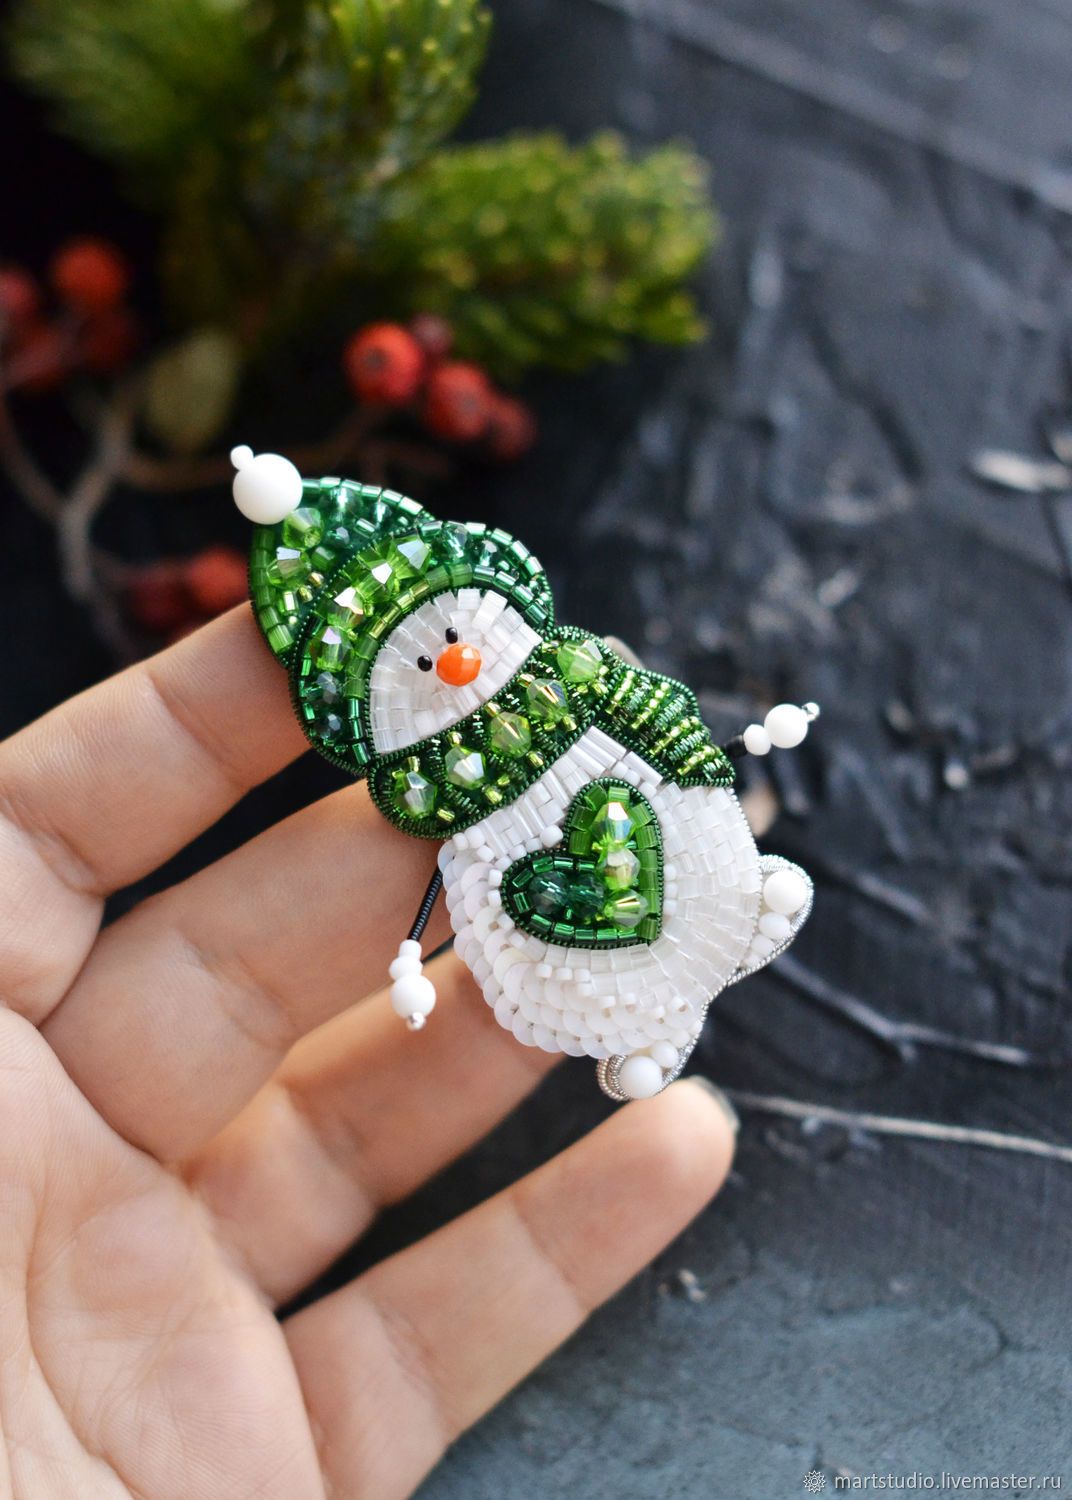 Embellish home and outfits by attaching Christmas brooches